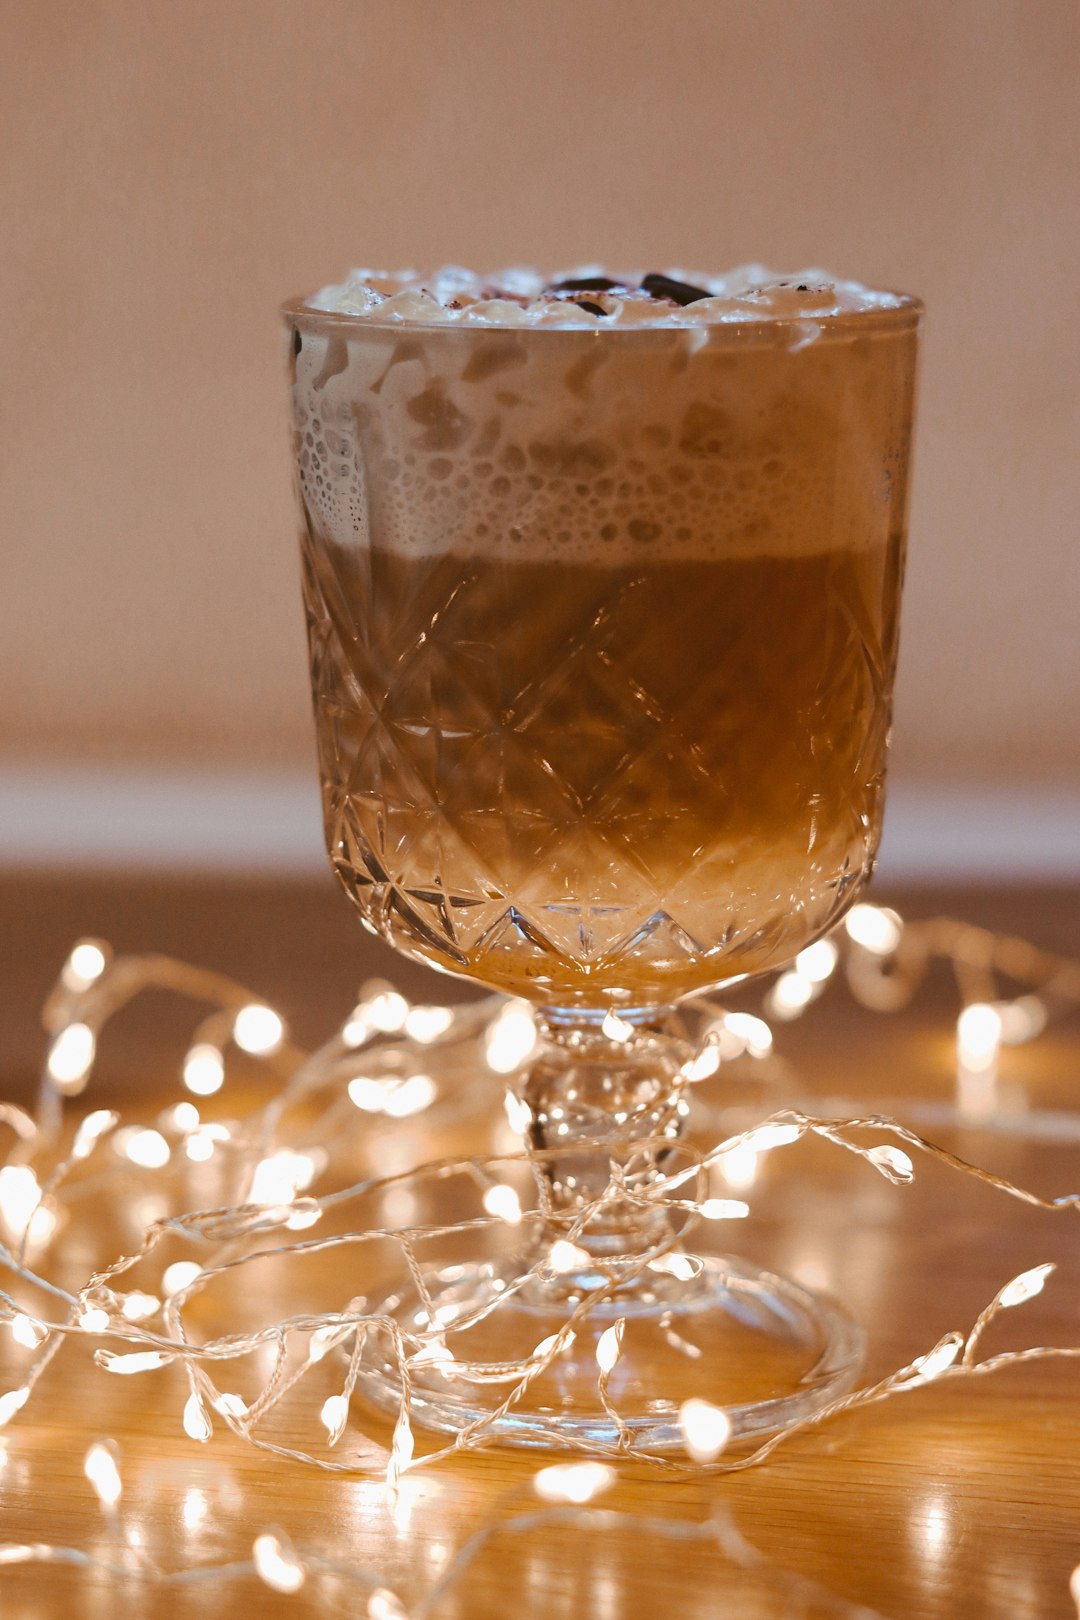 clear glass cup with brown liquid